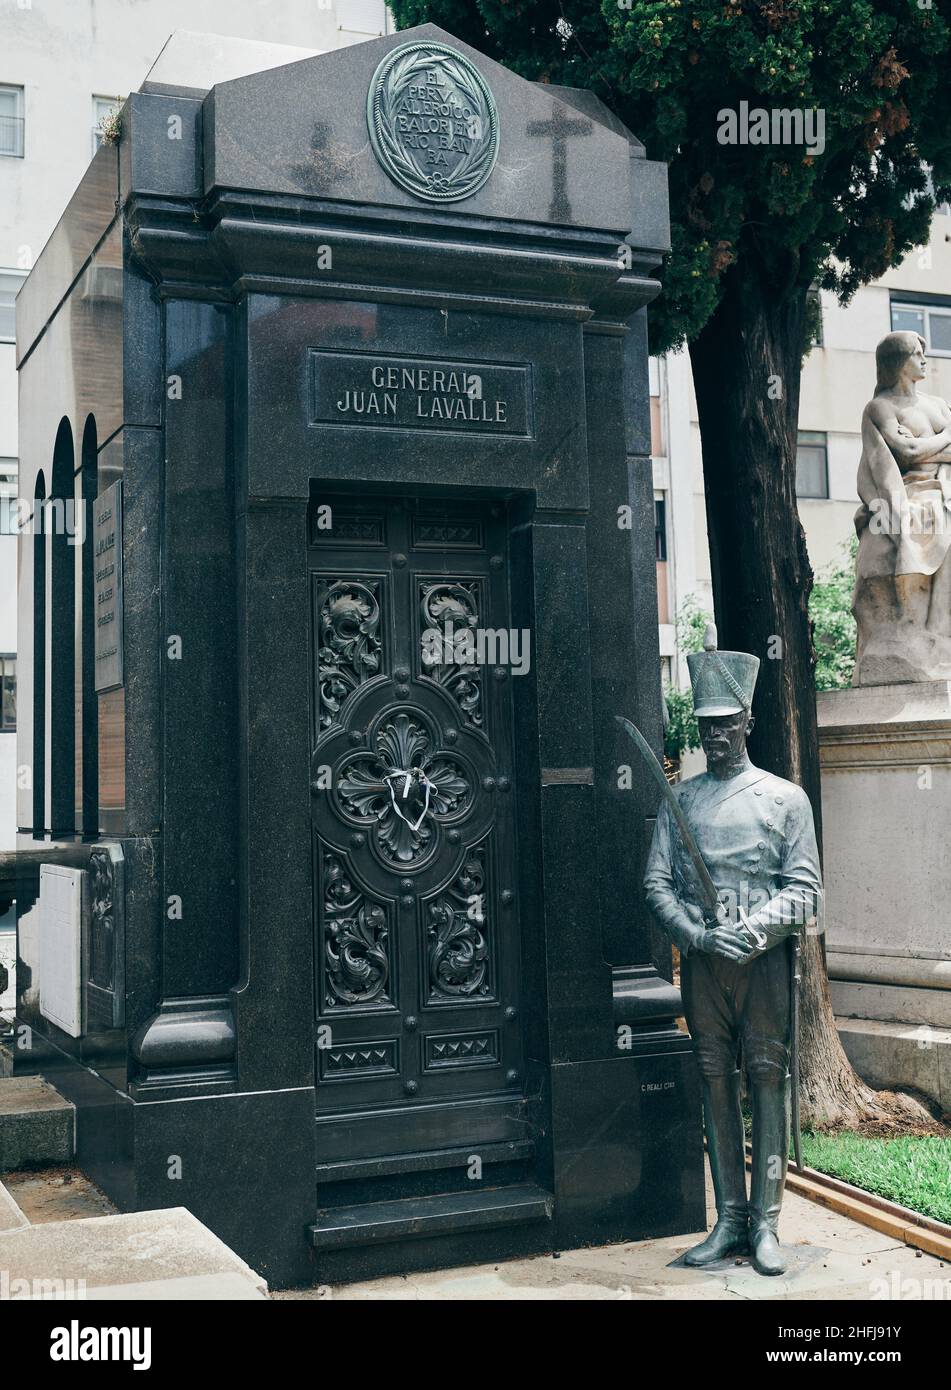 La Recoleta Cemetery located in Buenos Aires, Argentina. It contains the graves of some of the most important Argentine historical figures. Jan 2022 Stock Photo